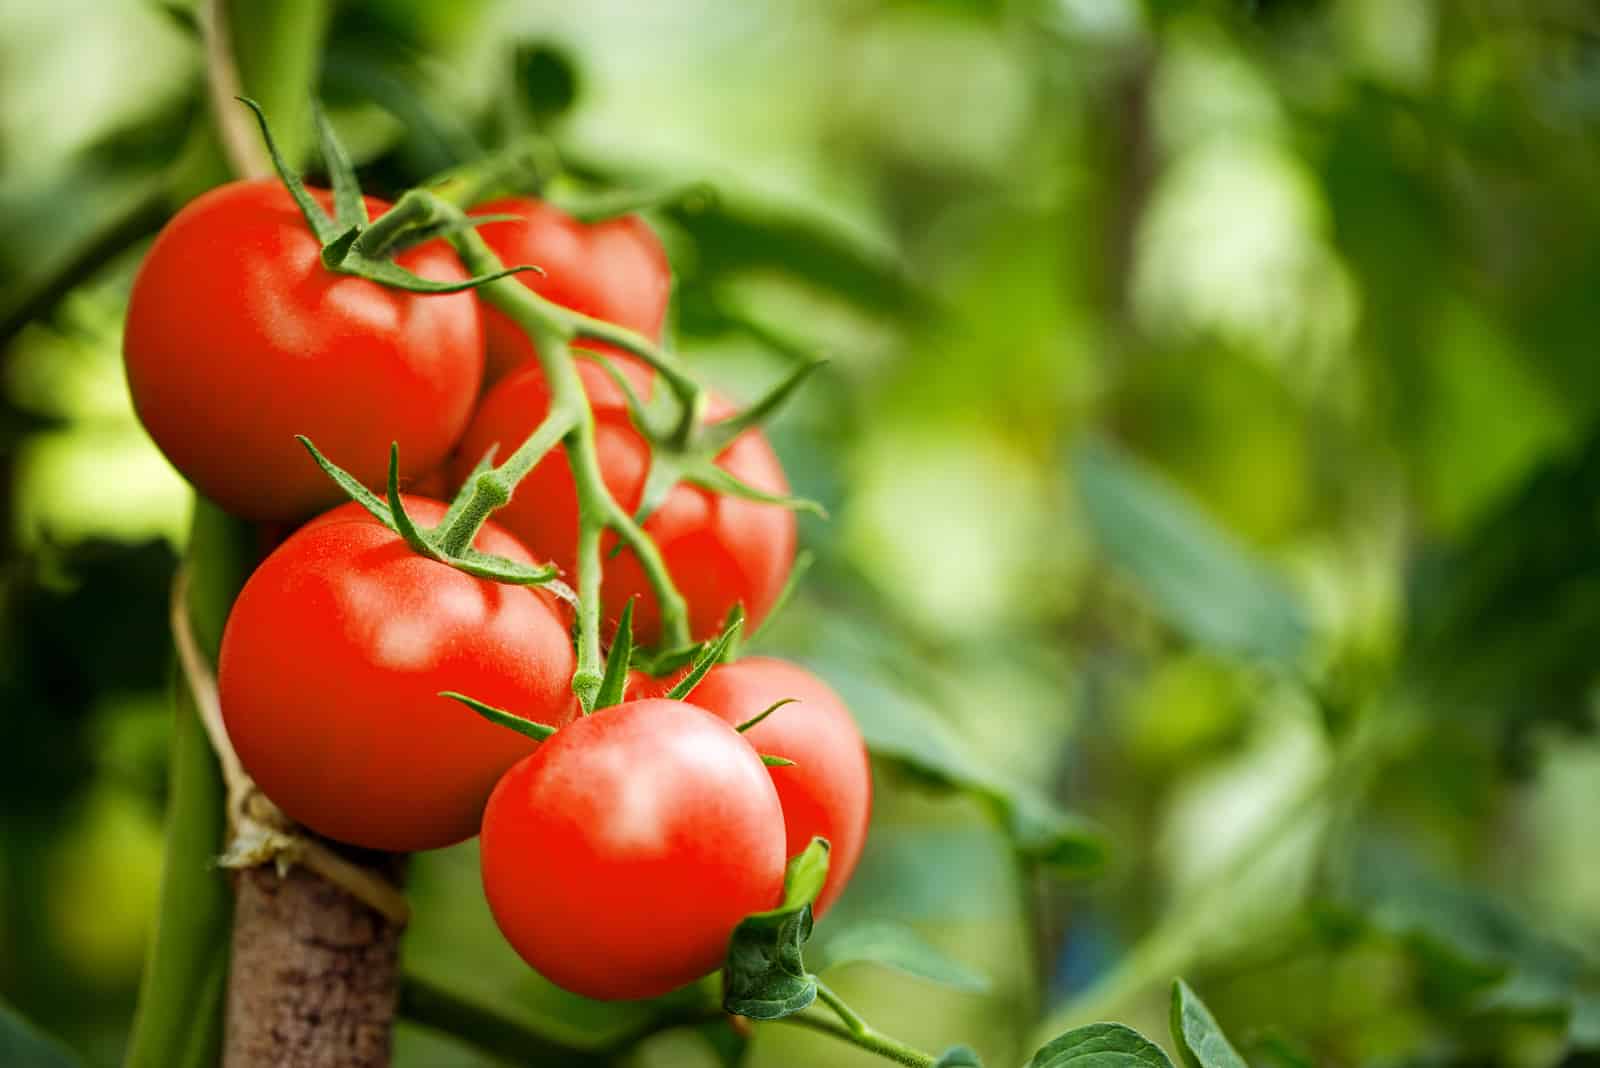 How To Remove Lectins From Tomatoes – A Step By Step Guide